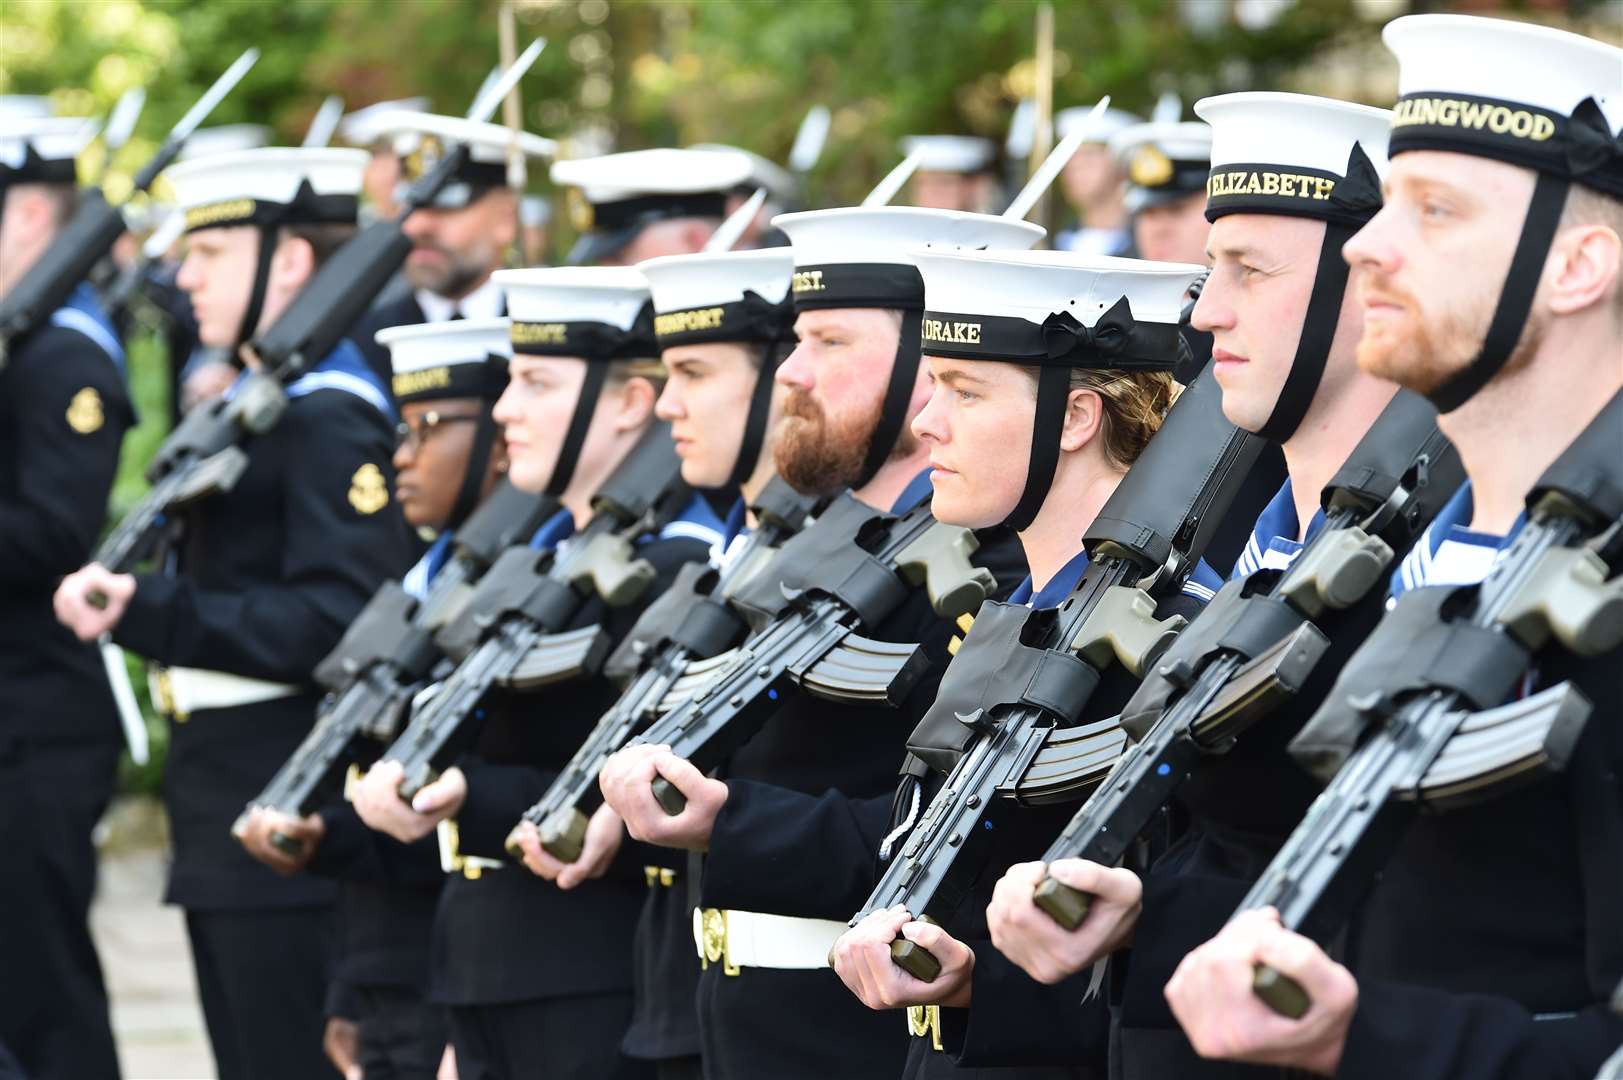 Members of the Royal Navy at the new national memorial and garden of reflection (Peter Byrne/PA)